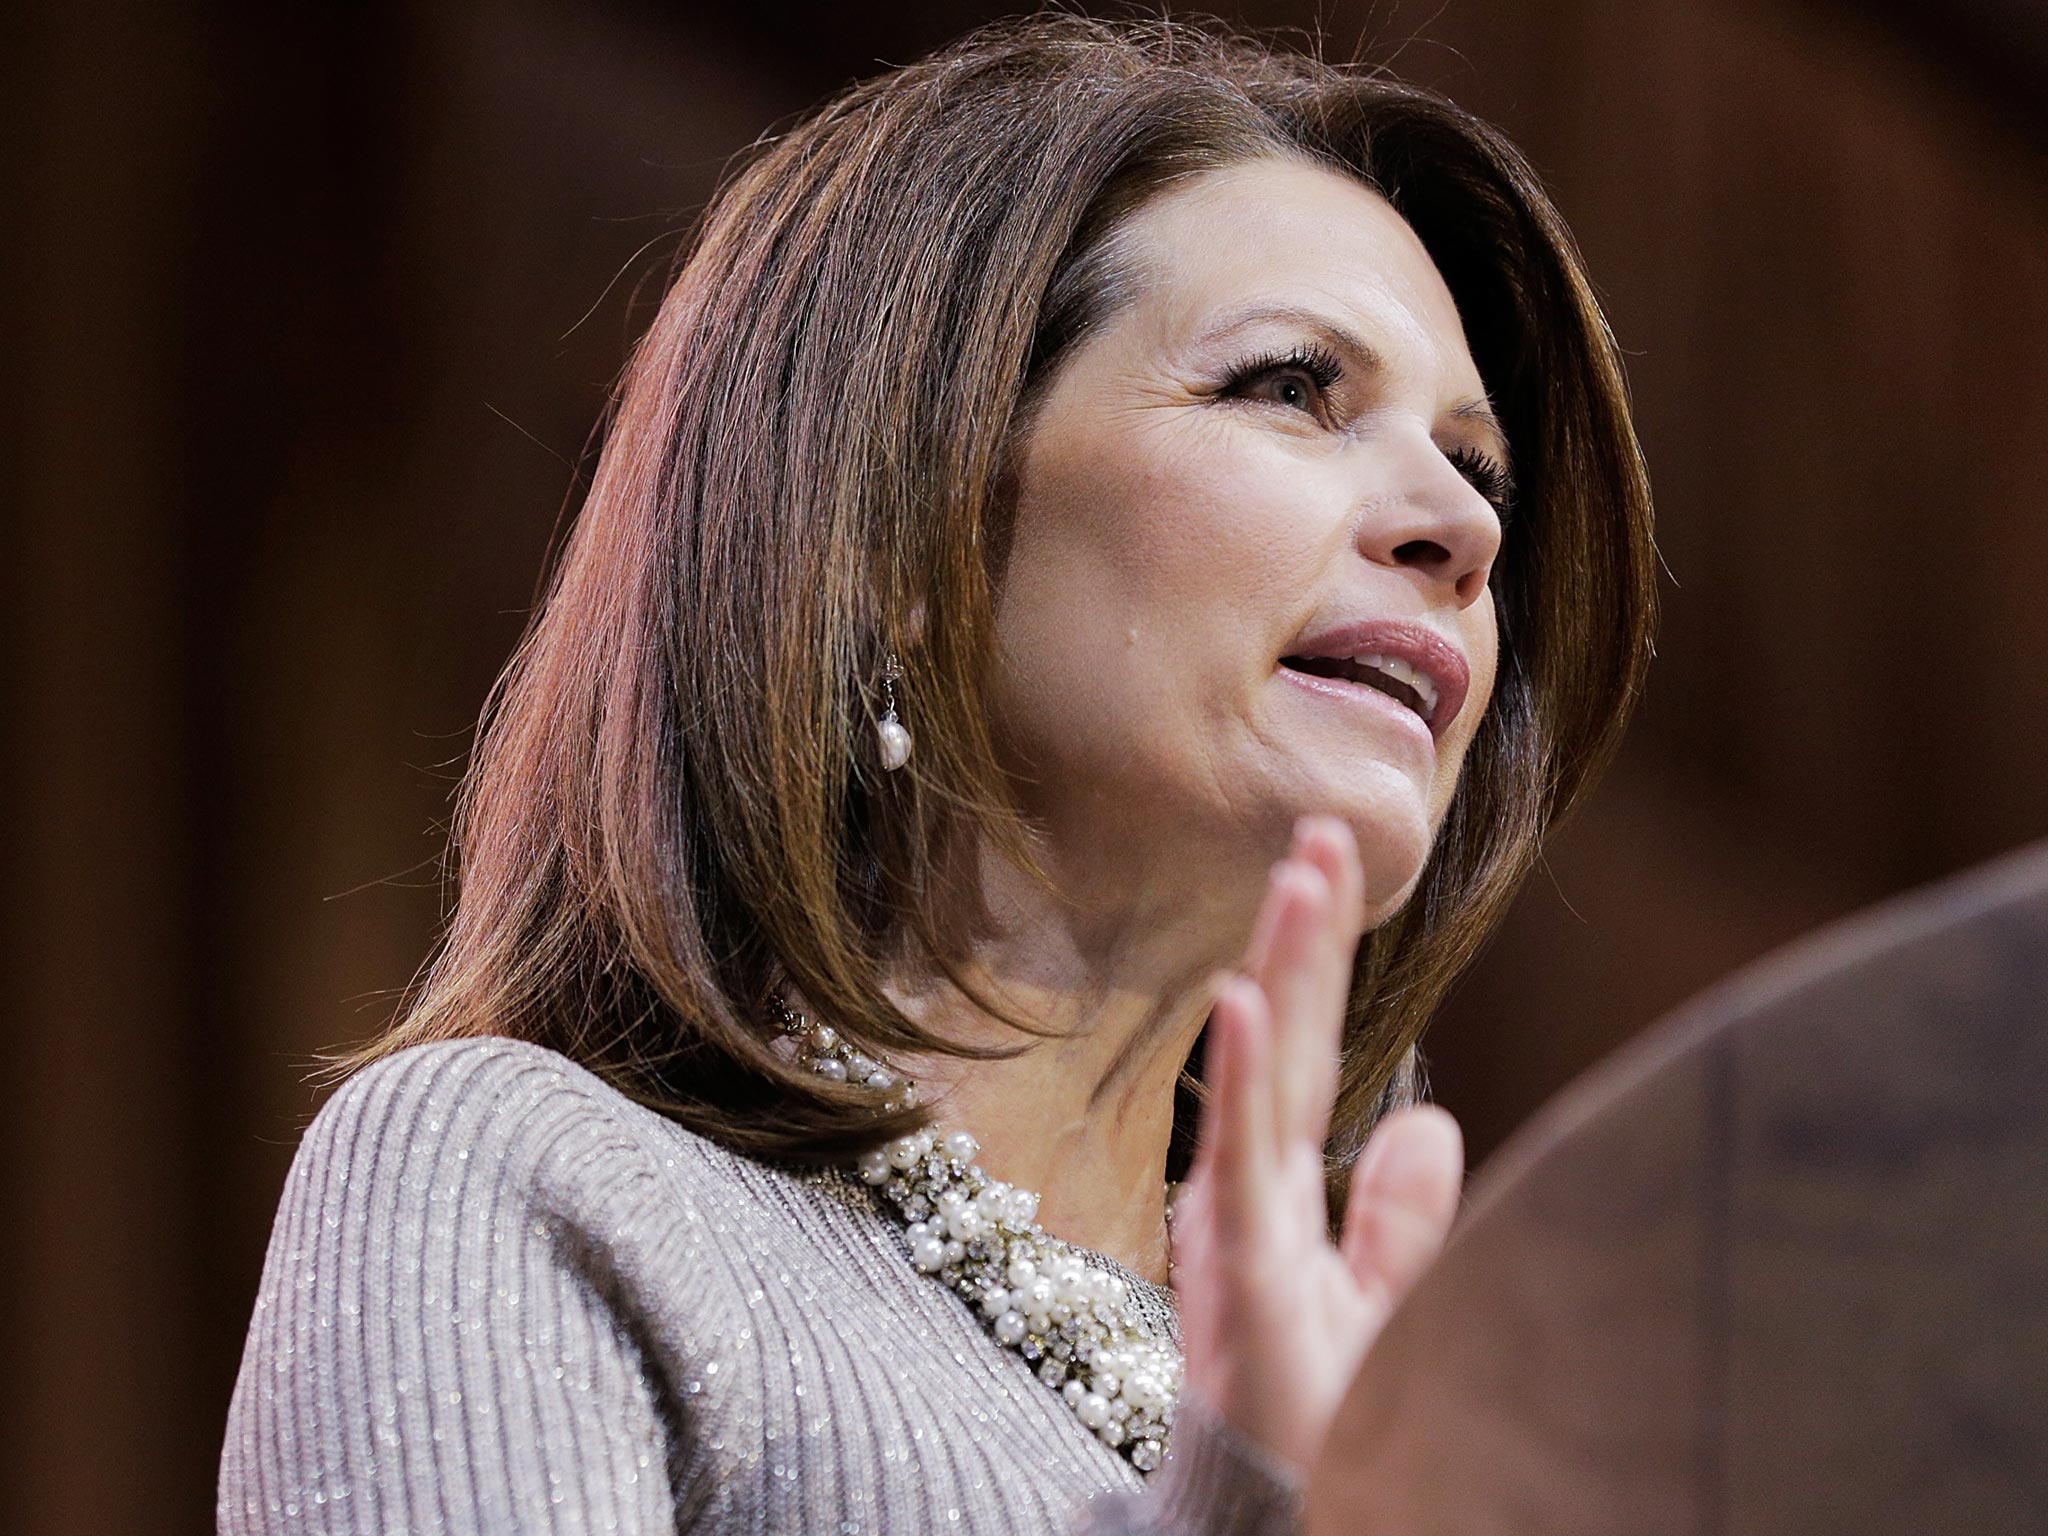 Former US Presidential candidate and “Queen of the Tea Party” Michele Bachmann made the comments during a speech at the Oxford Union